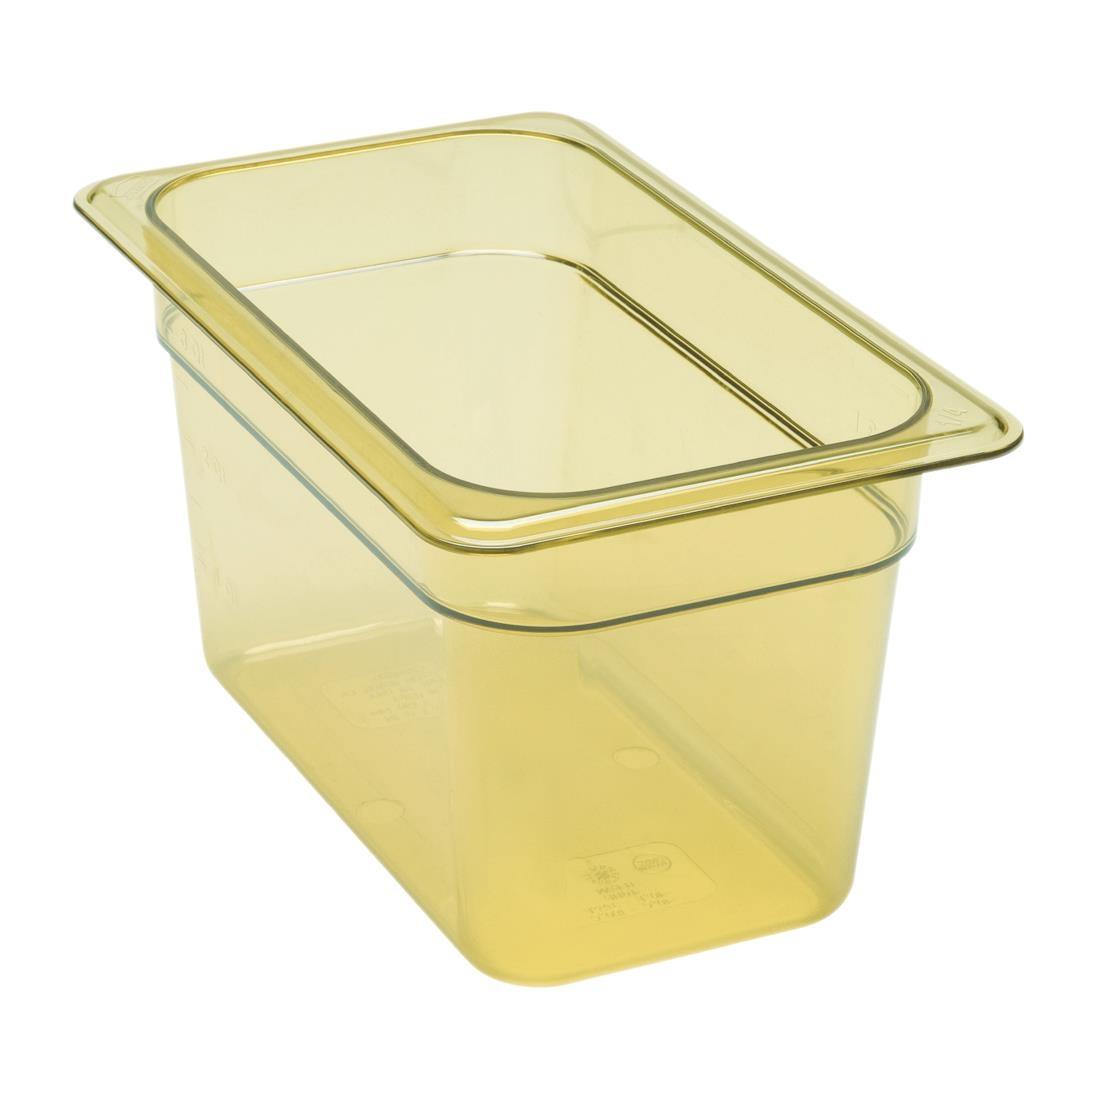 Cambro High Heat 1/4 Gastronorm Food Pan 150mm - DW491  - 1